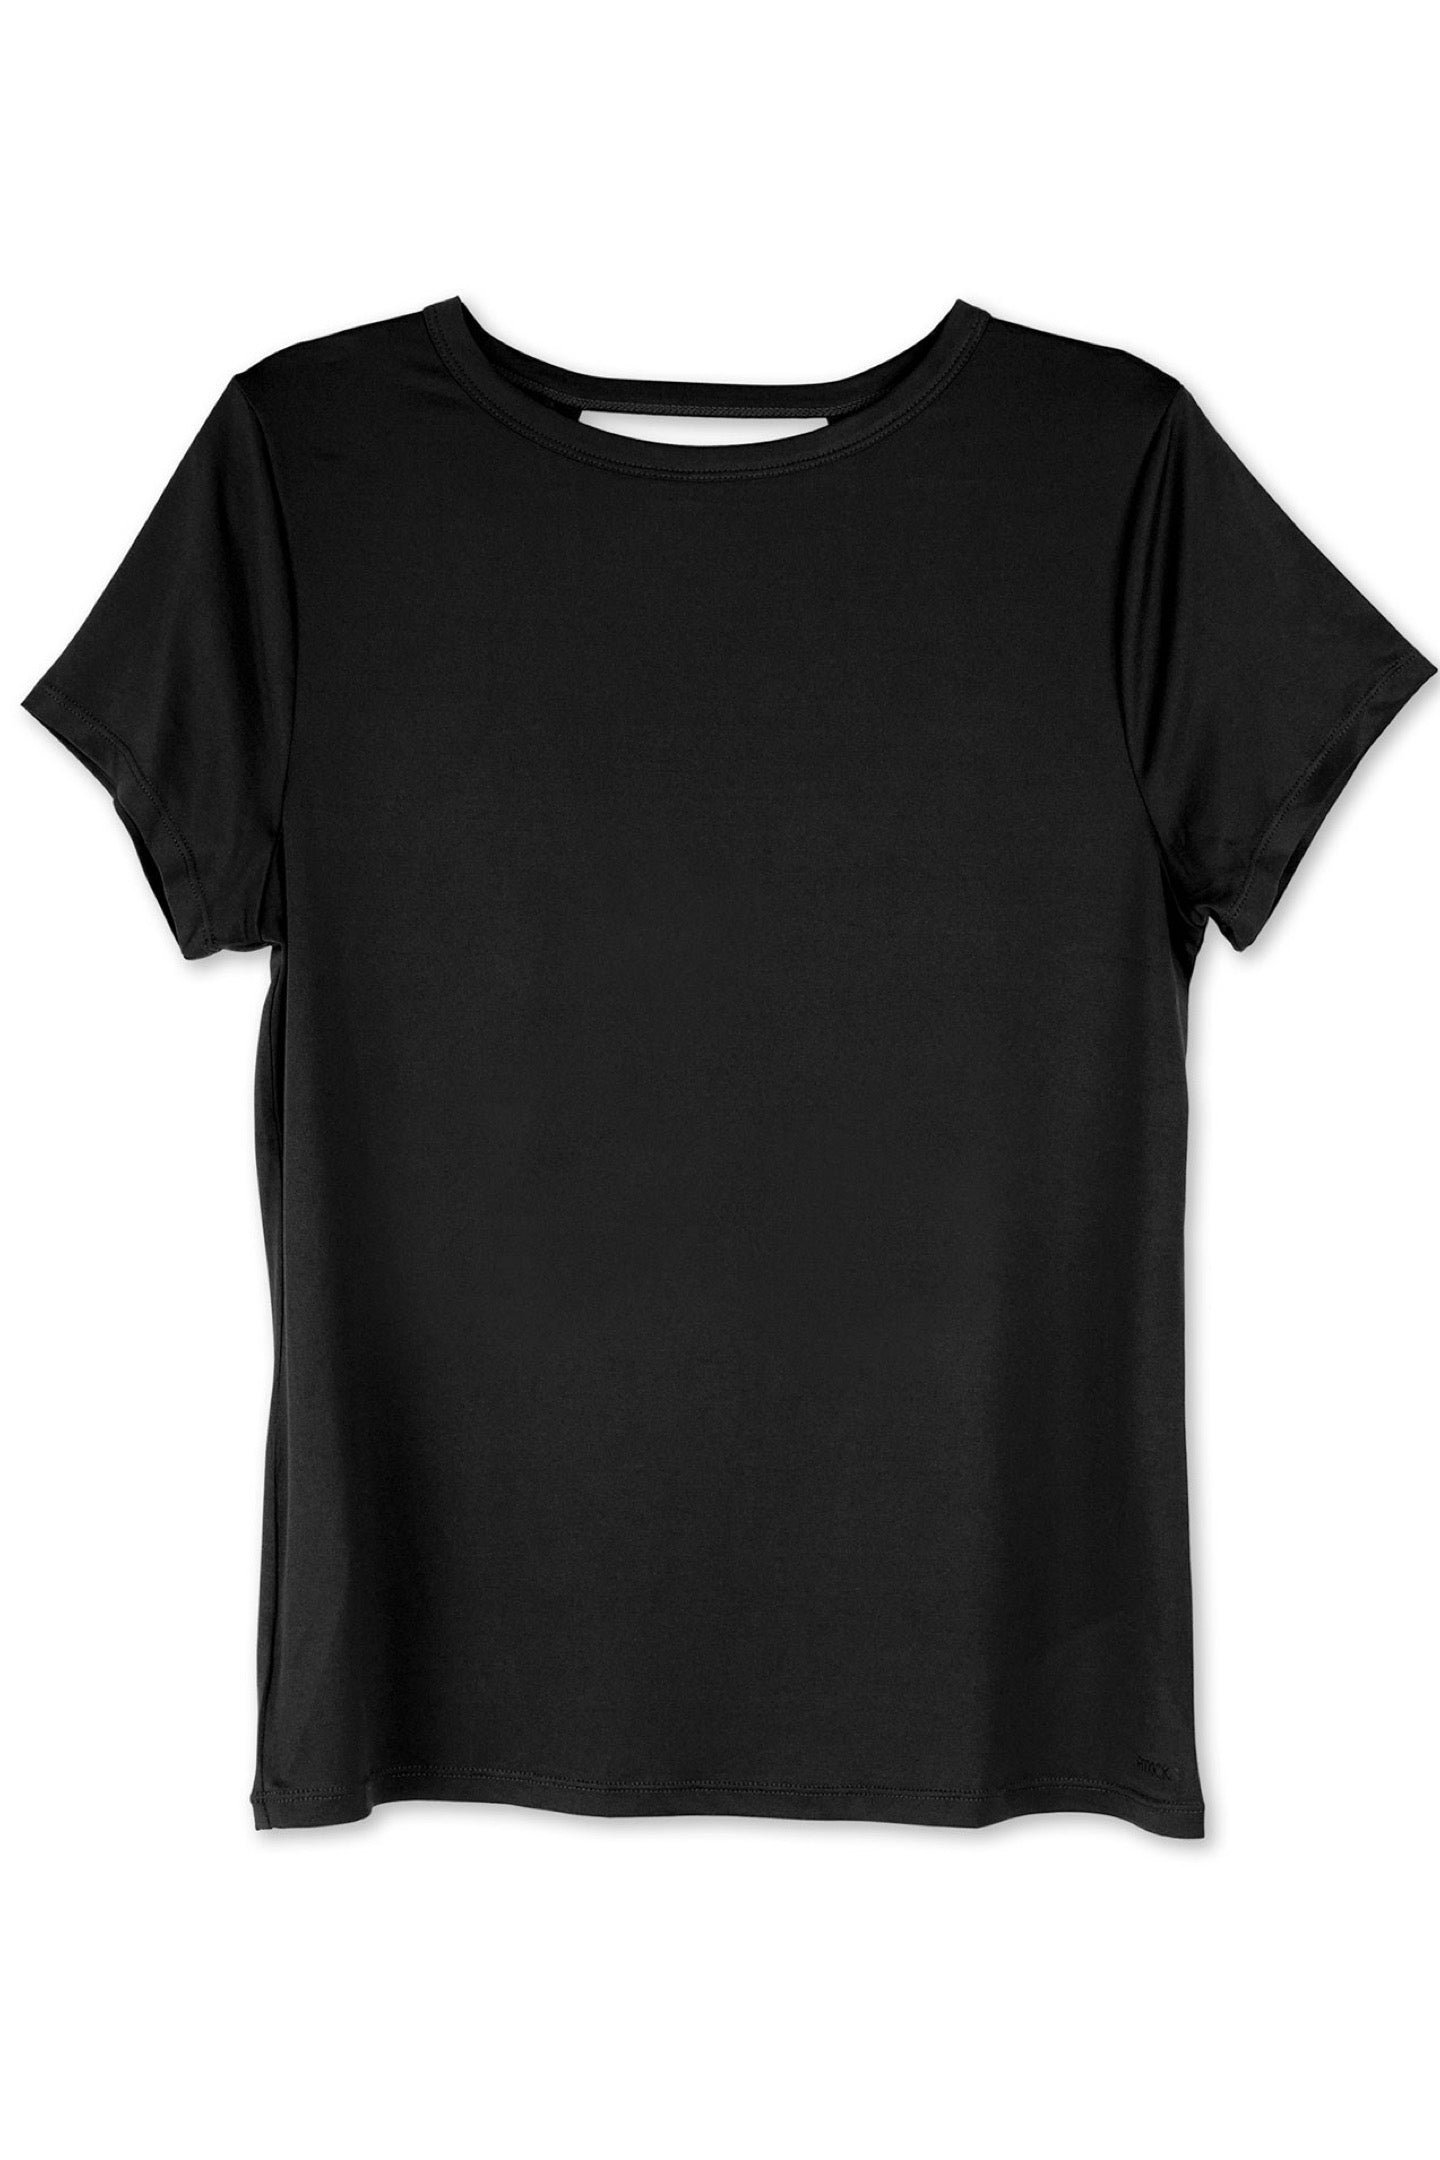 FITKICKS CROSSOVERS Active Lifestyle T-Shirt In Black